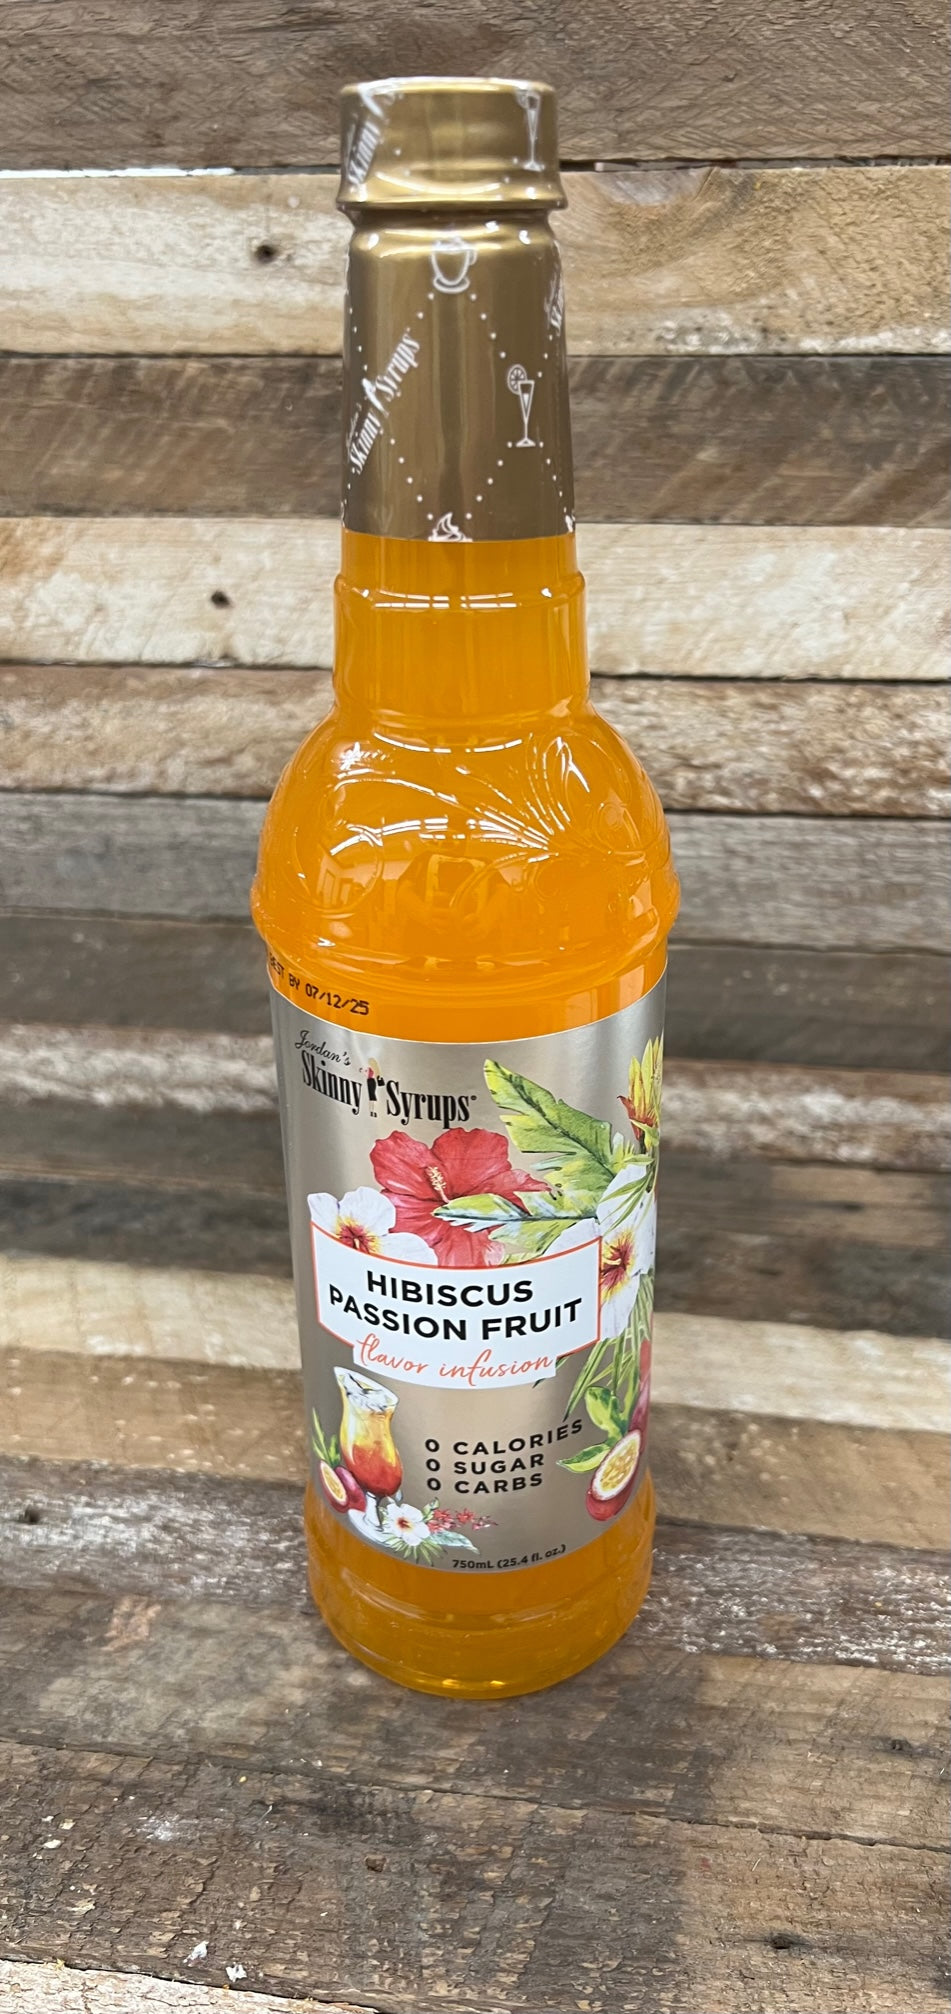 Skinny Syrup Hibiscus Passion Fruit Water Flavor